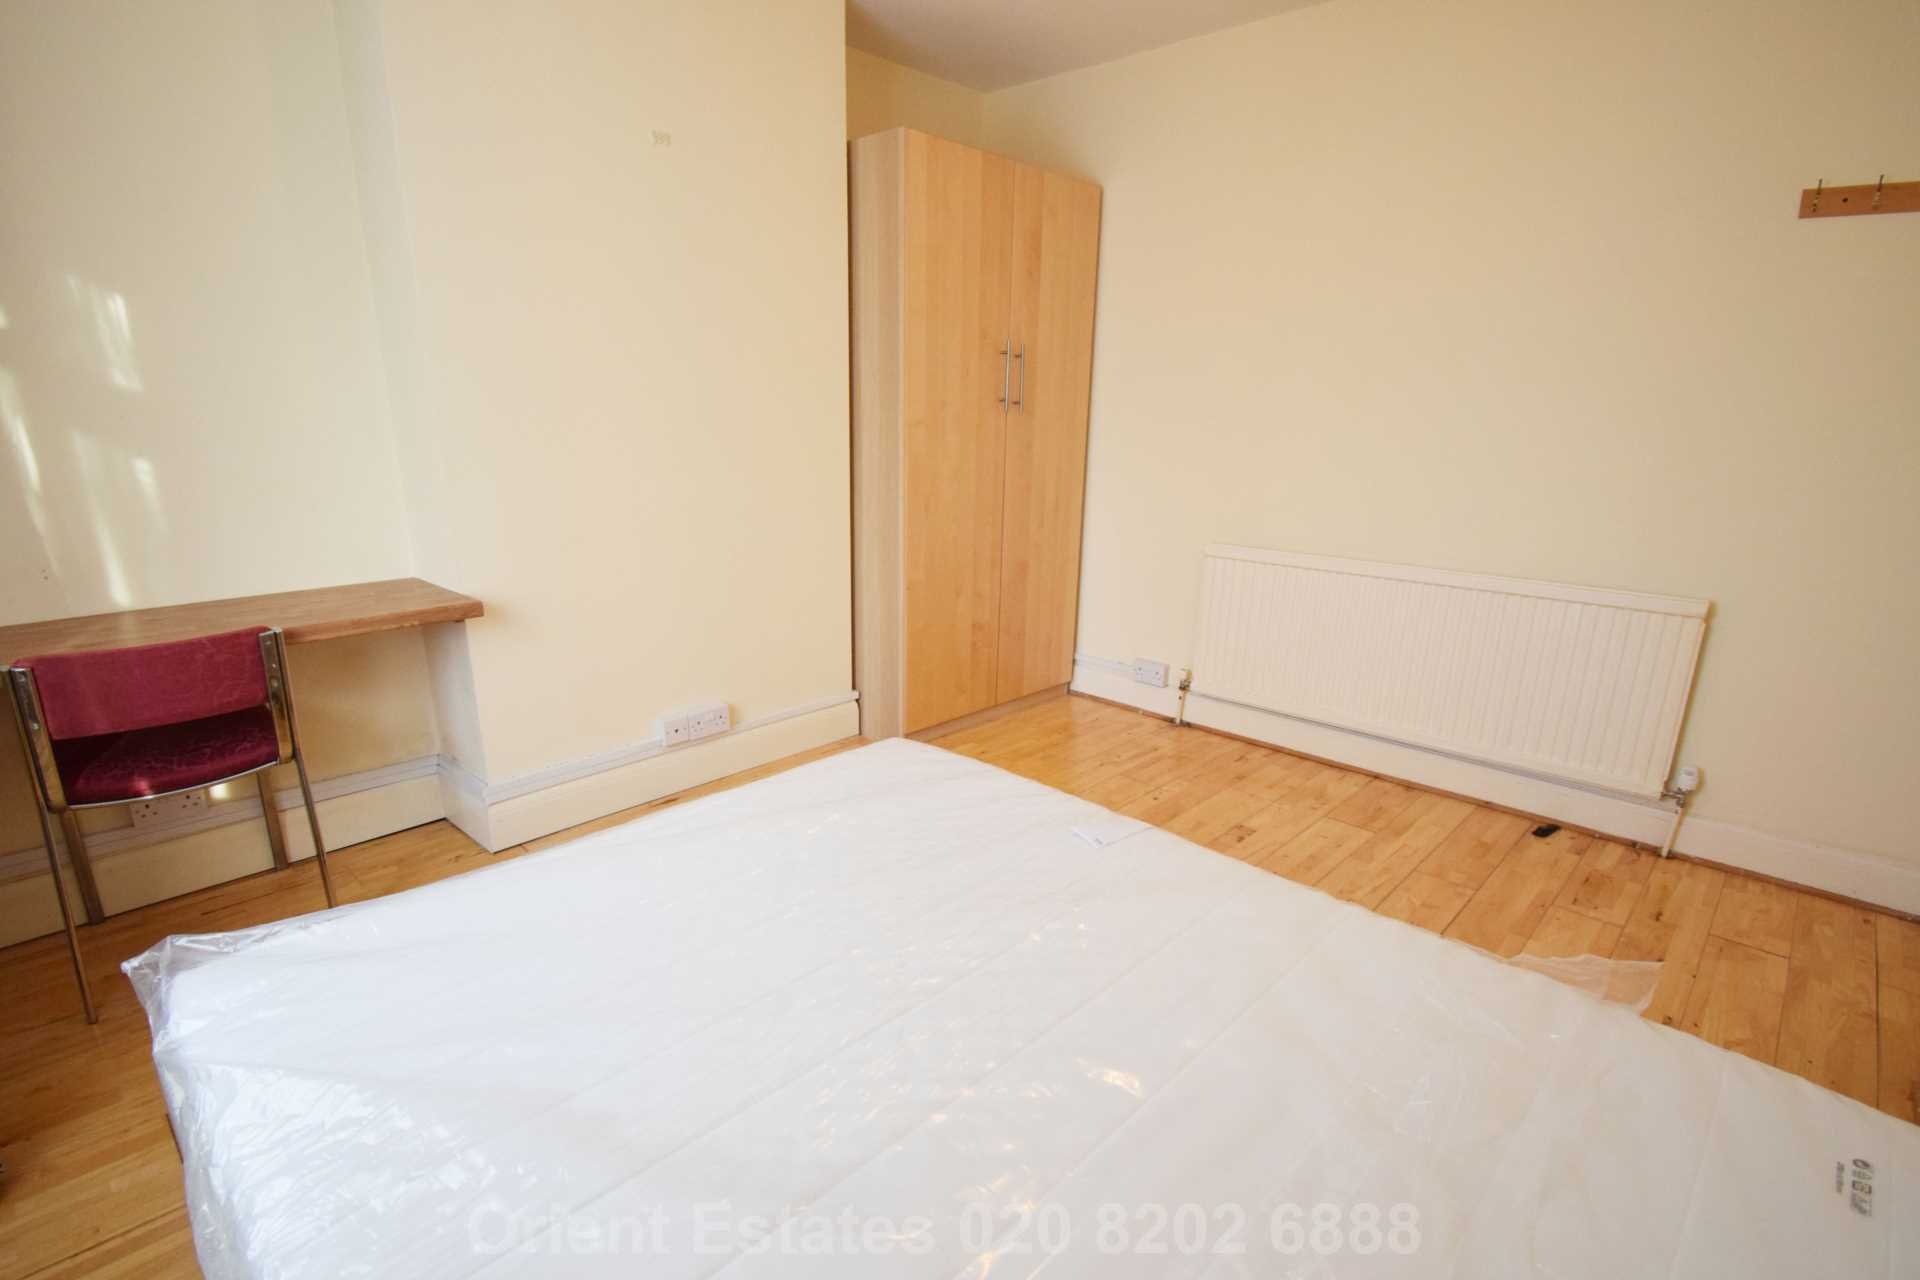 0 bed Room for rent in London. From Orient Estates